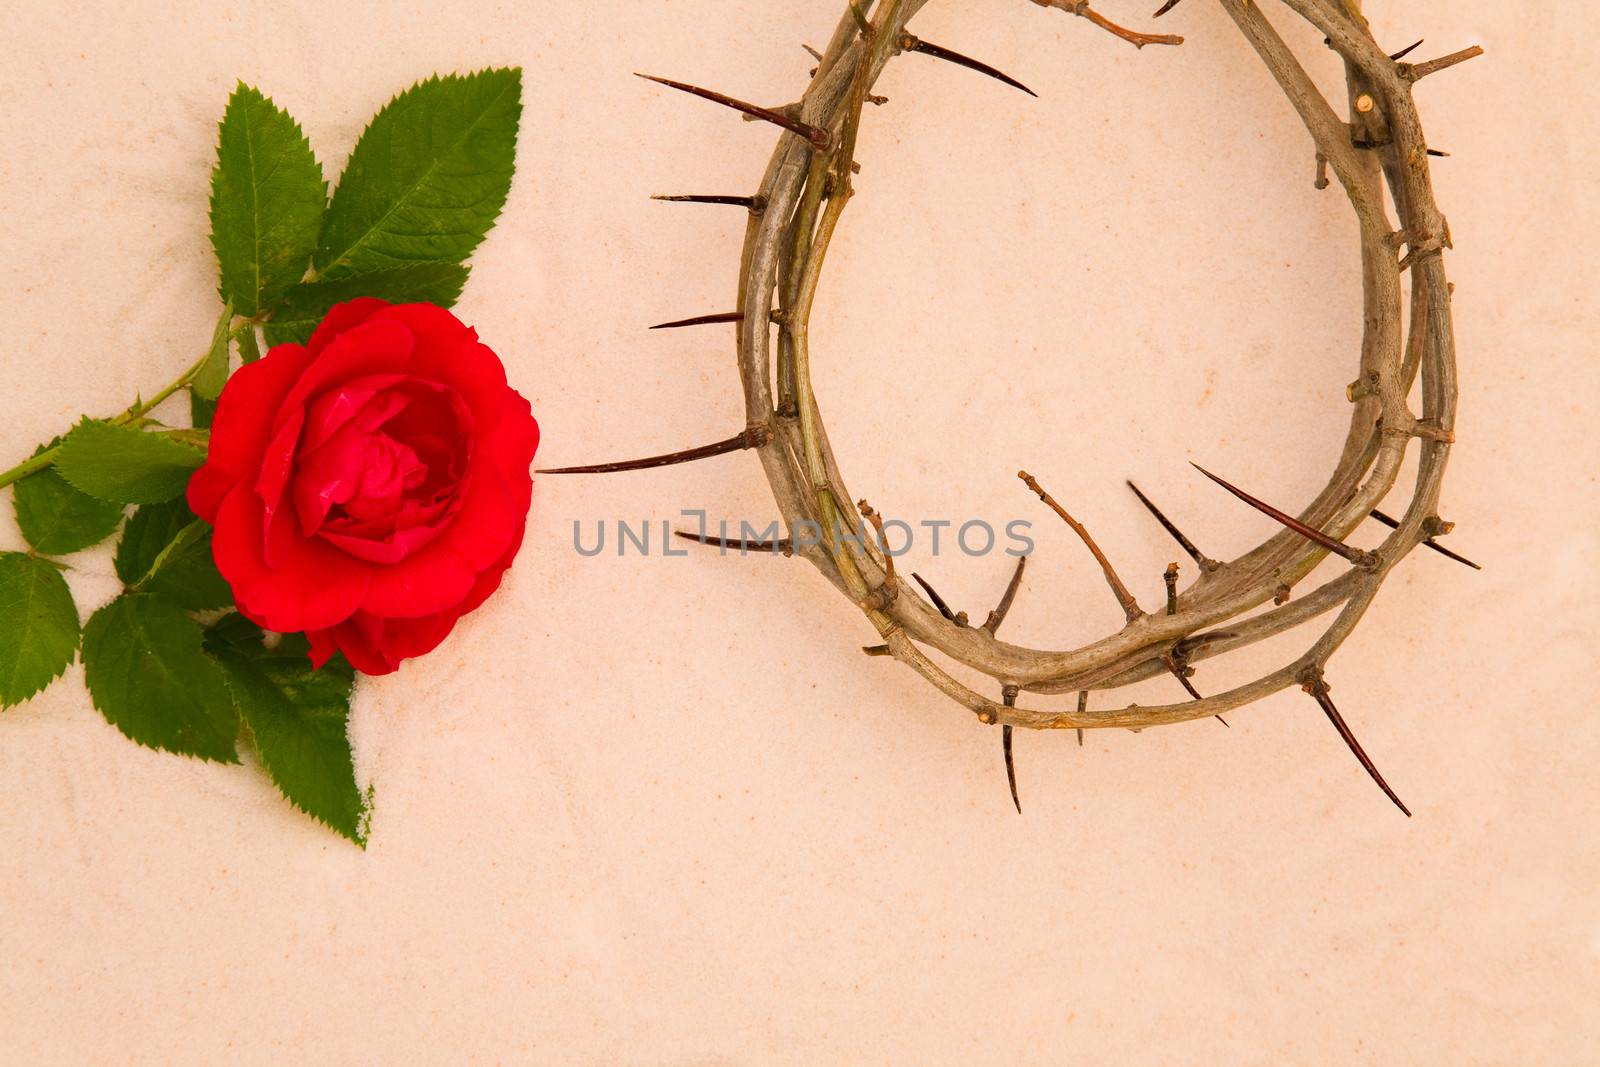 Crown of Thorns and red rose on sand background